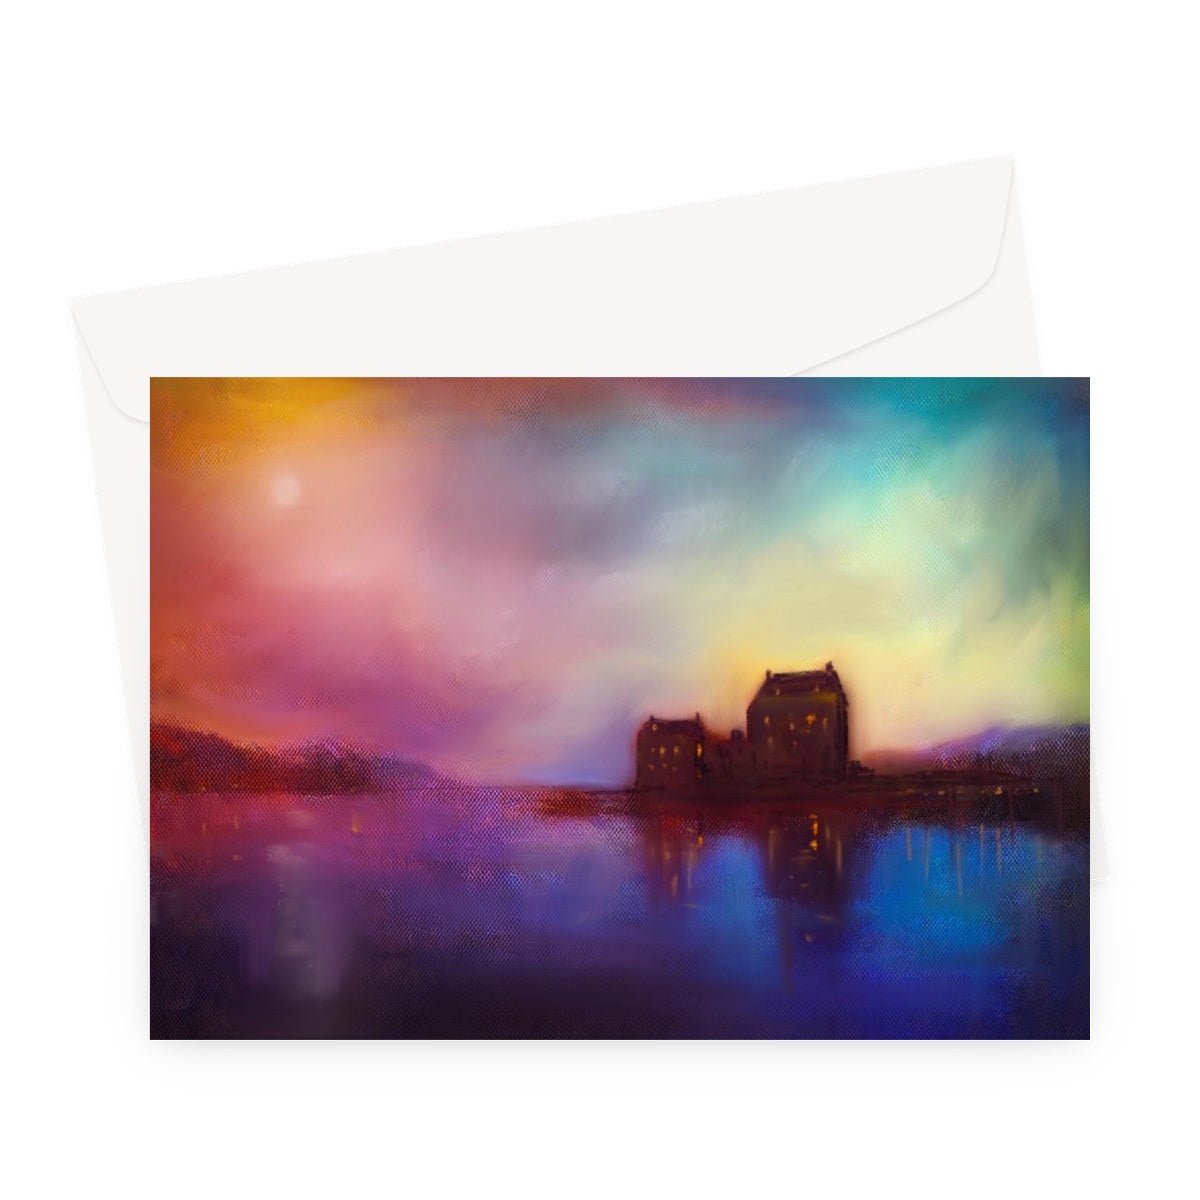 Eilean Donan Castle Sunset Art Gifts Greeting Card-Greetings Cards-Scottish Castles Art Gallery-A5 Landscape-1 Card-Paintings, Prints, Homeware, Art Gifts From Scotland By Scottish Artist Kevin Hunter